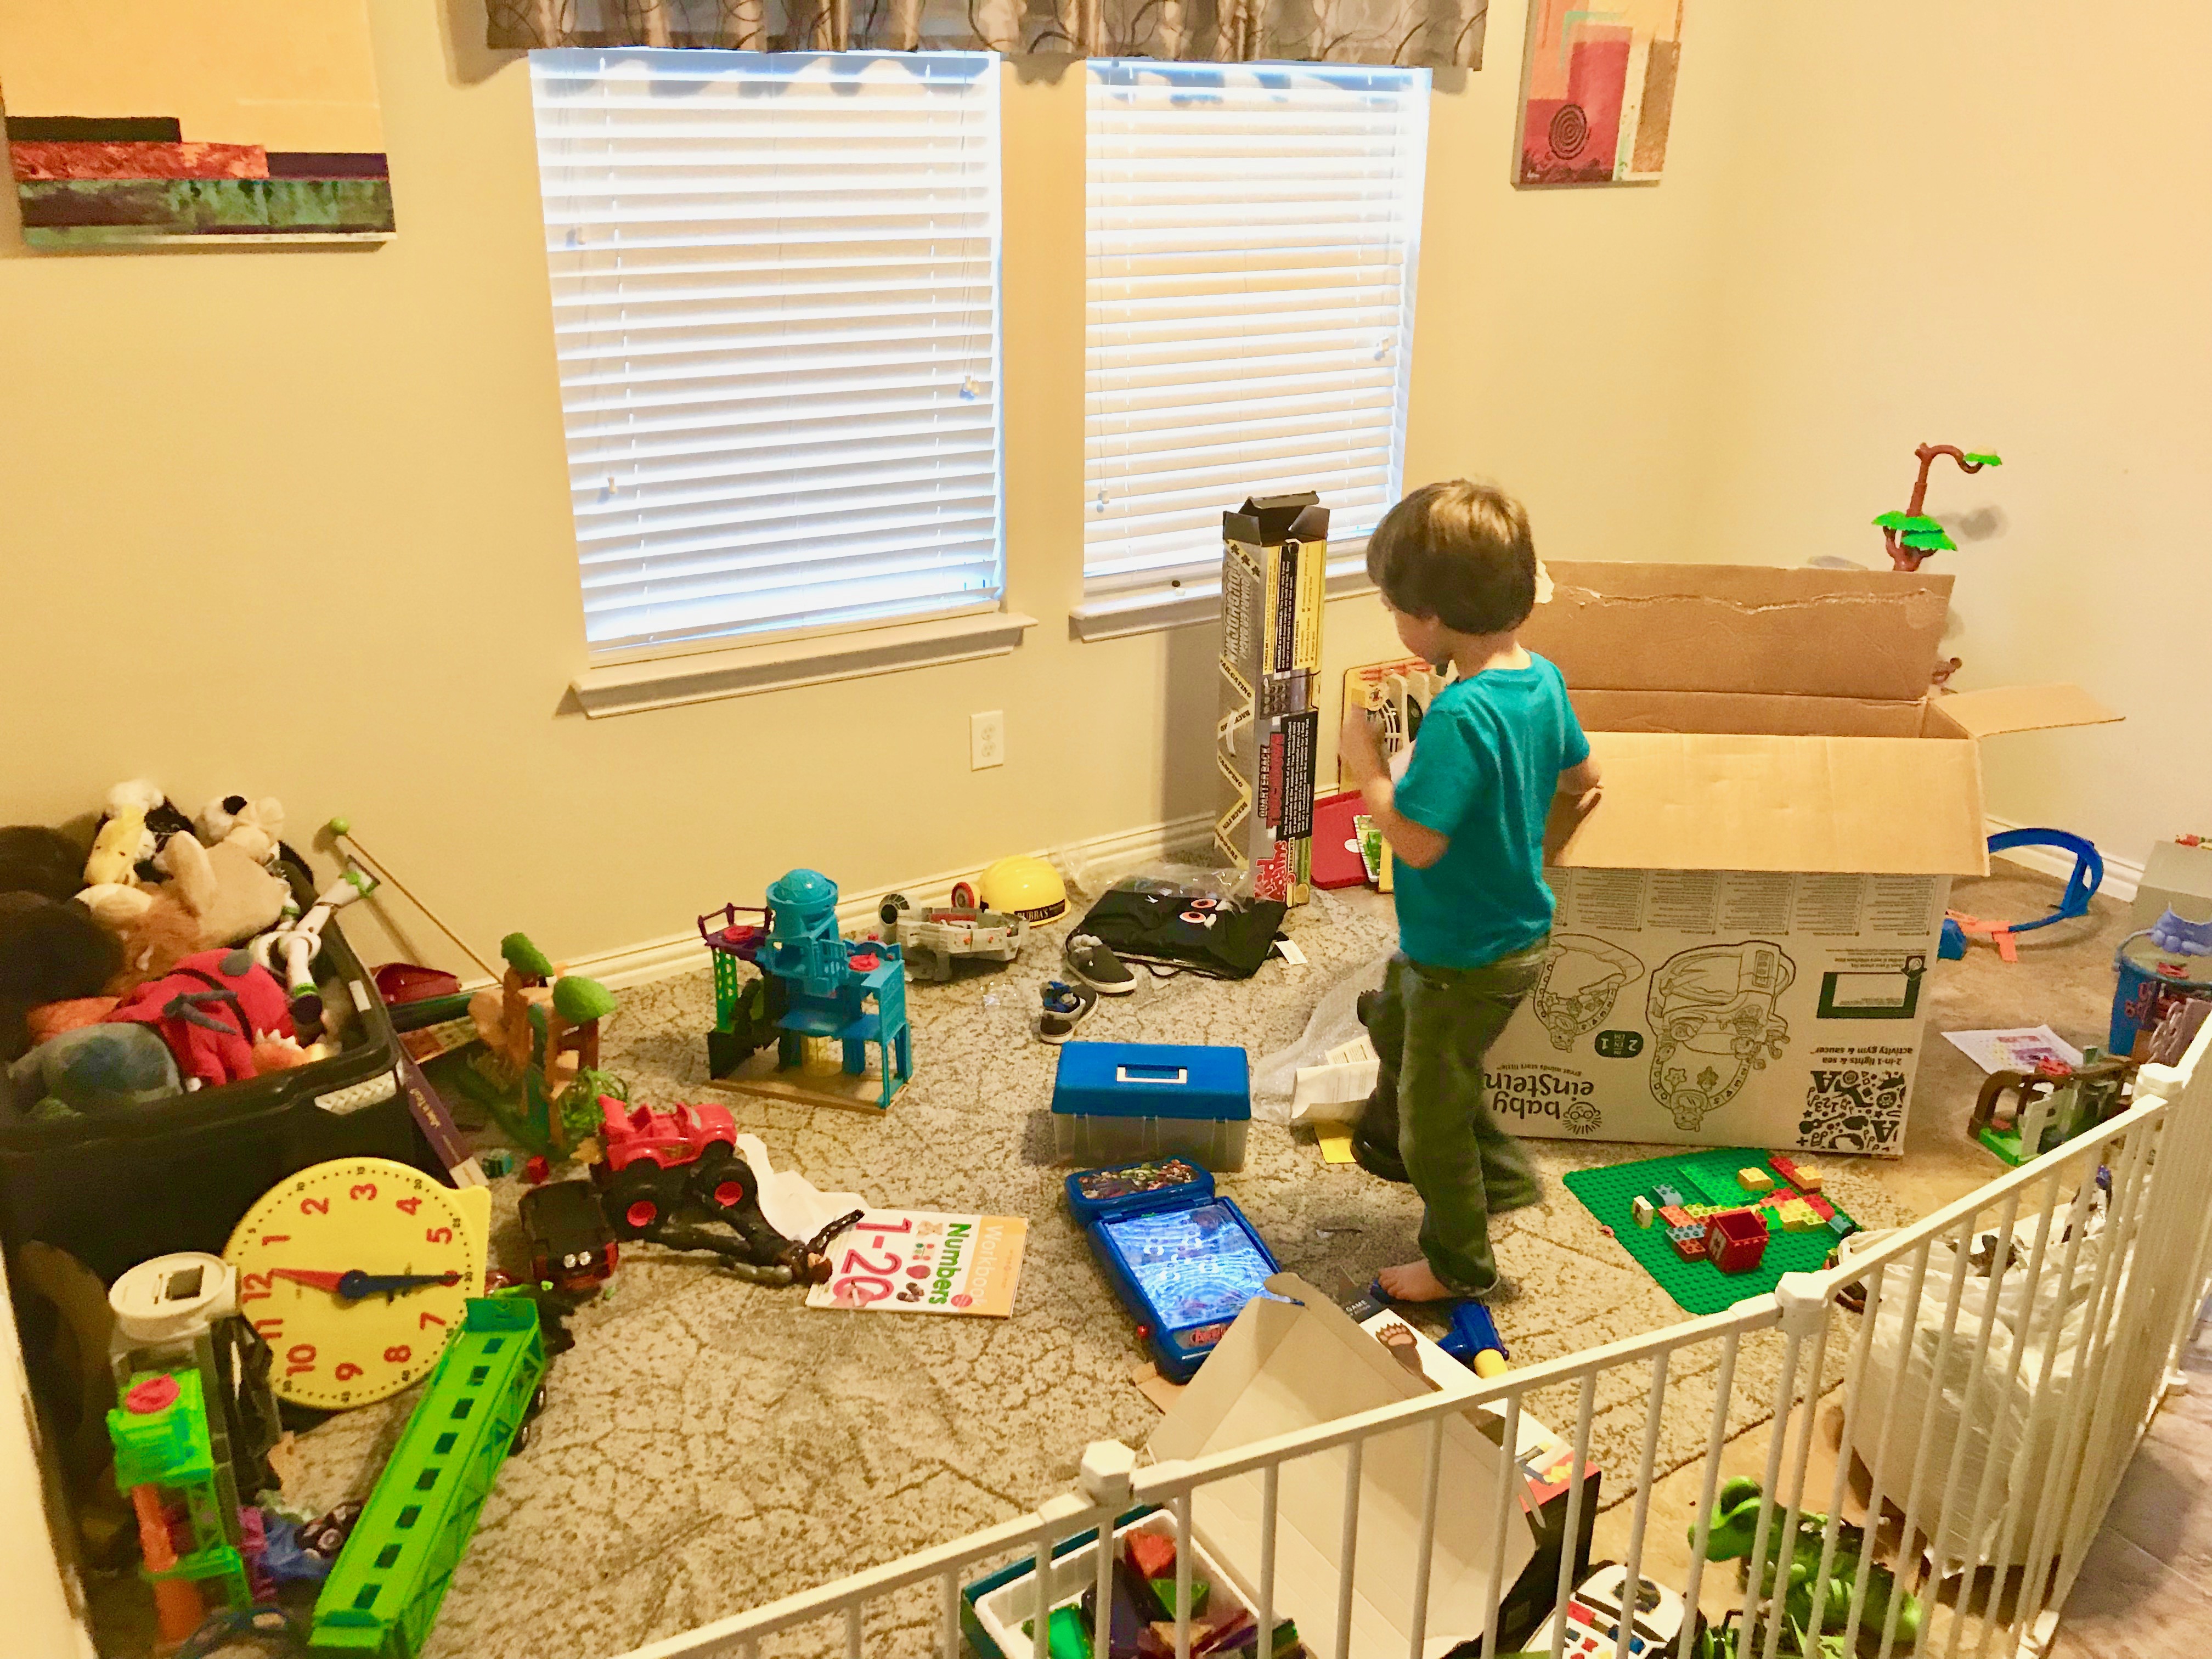 Messy playroom with toys everywhere